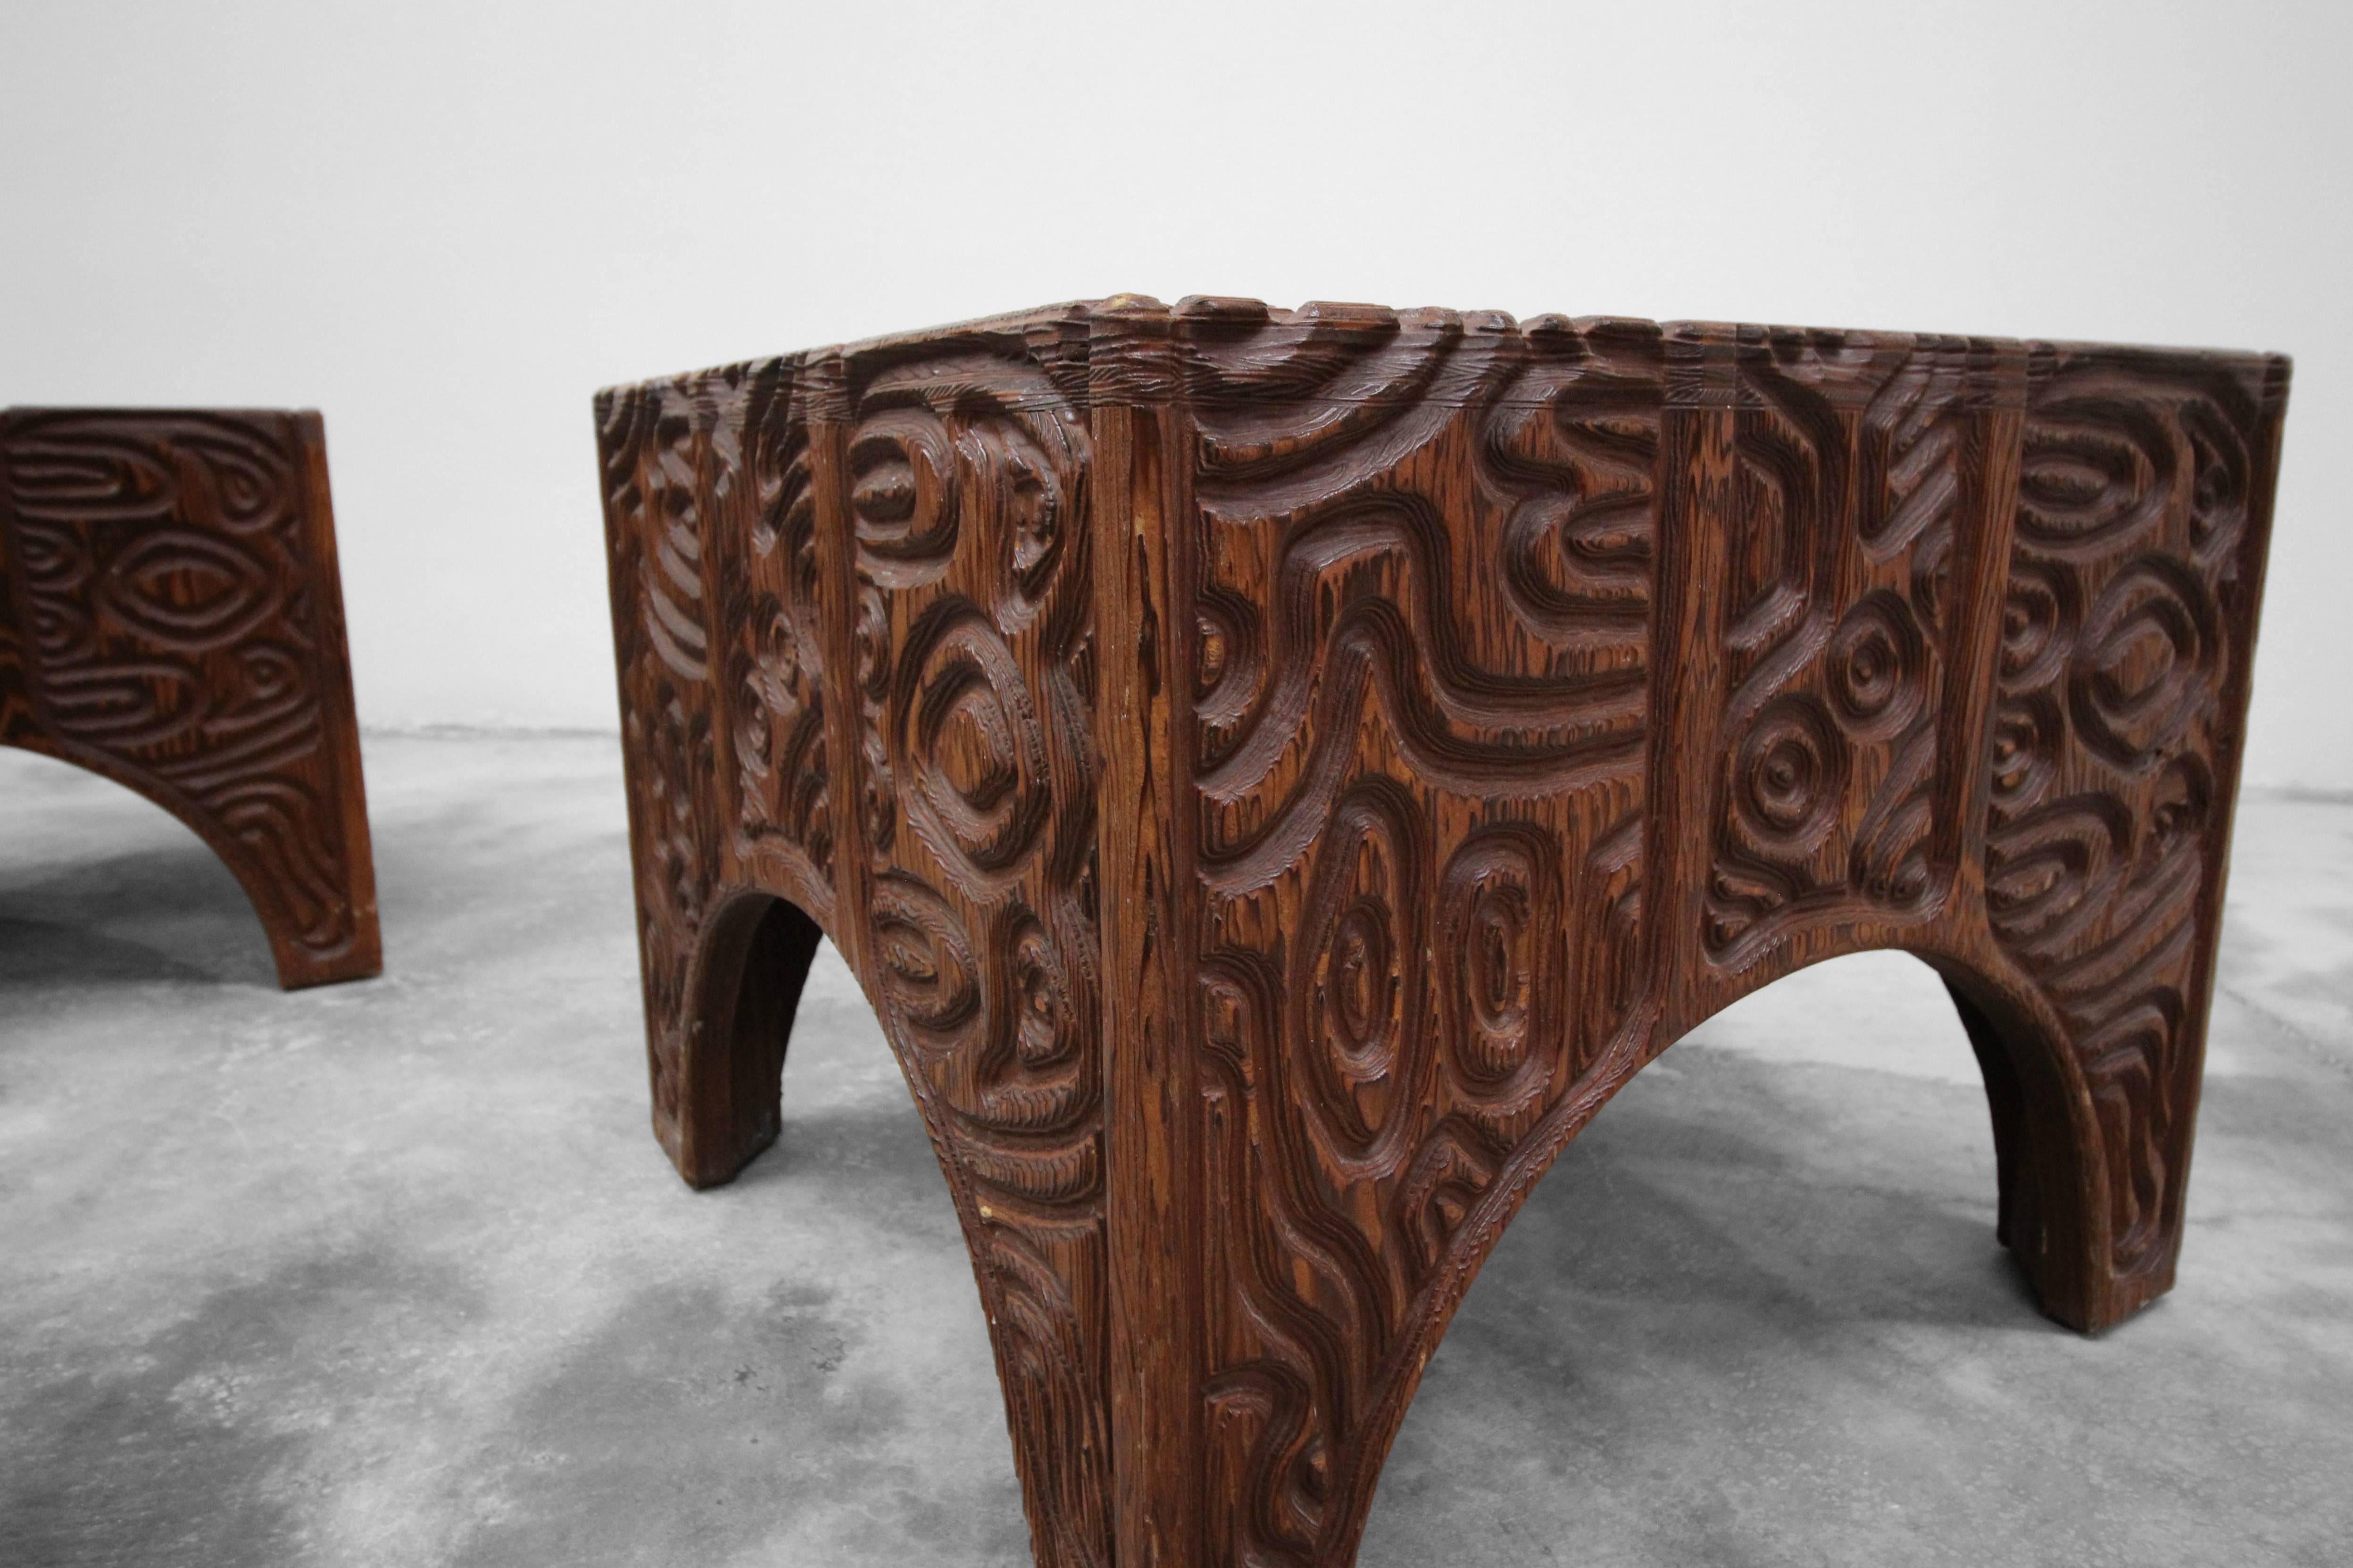 20th Century Midcentury Panelcarve Style Carved Wood Coffee Table by Sherrill Broudy